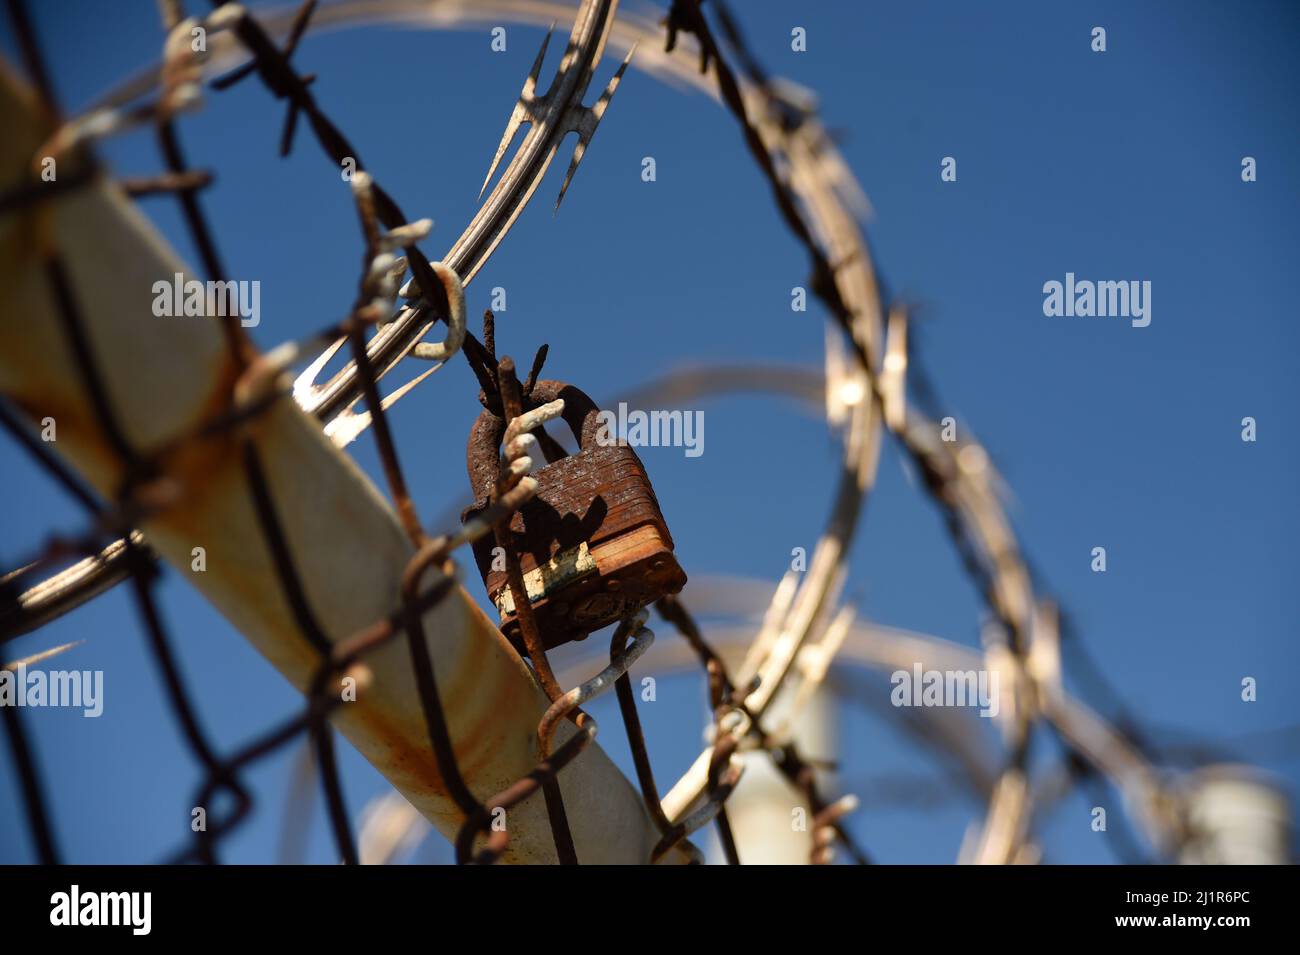 Rusty lock secured to barb wire in San Diego, California Stock Photo